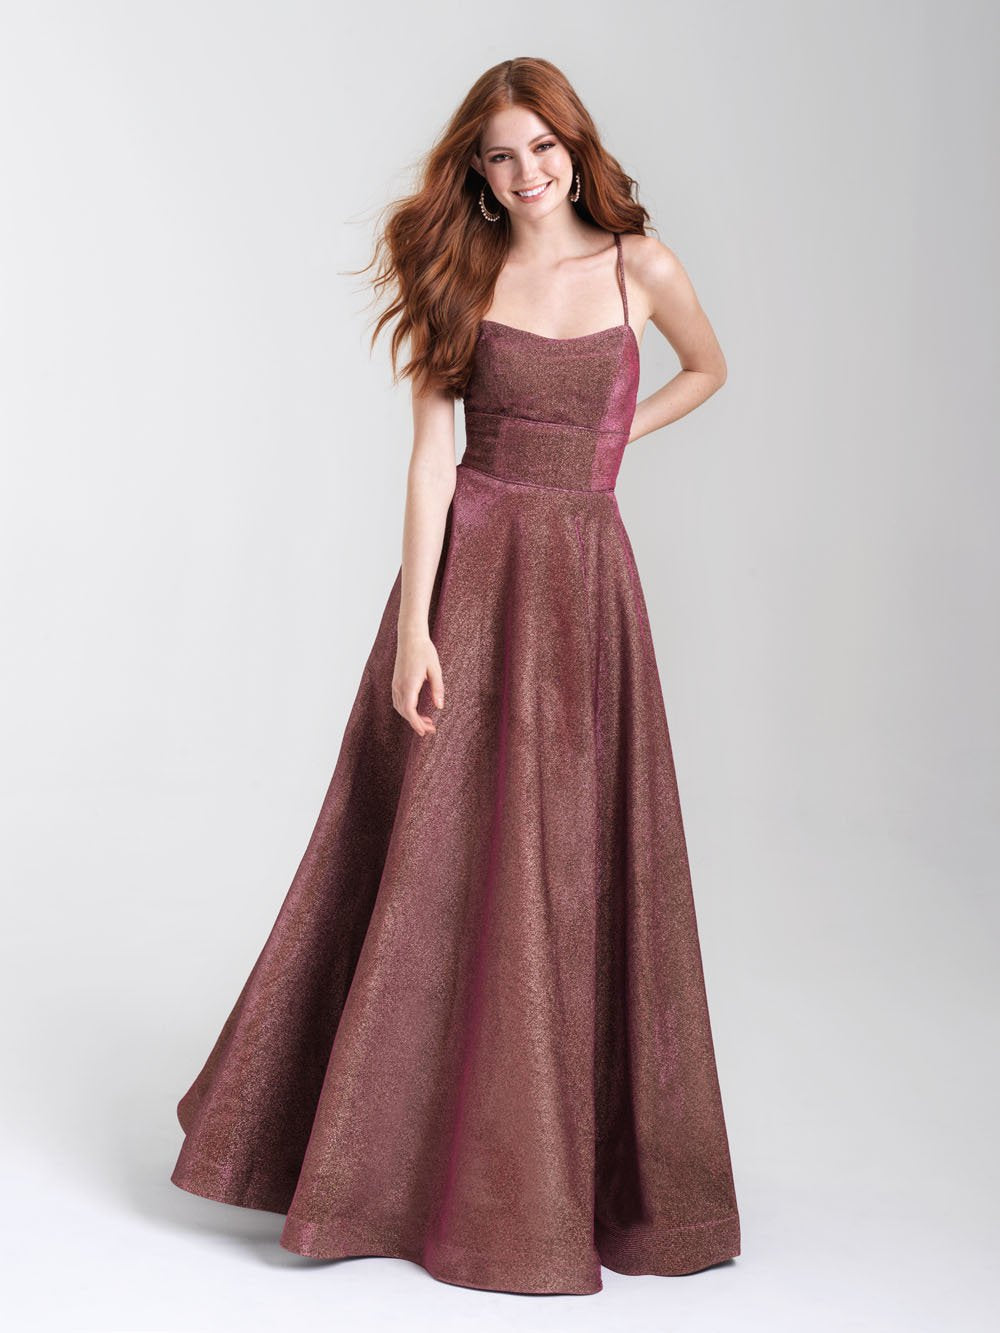 Madison James 20-381 dress images in these colors: Turquoise, Purple, Copper Rose.